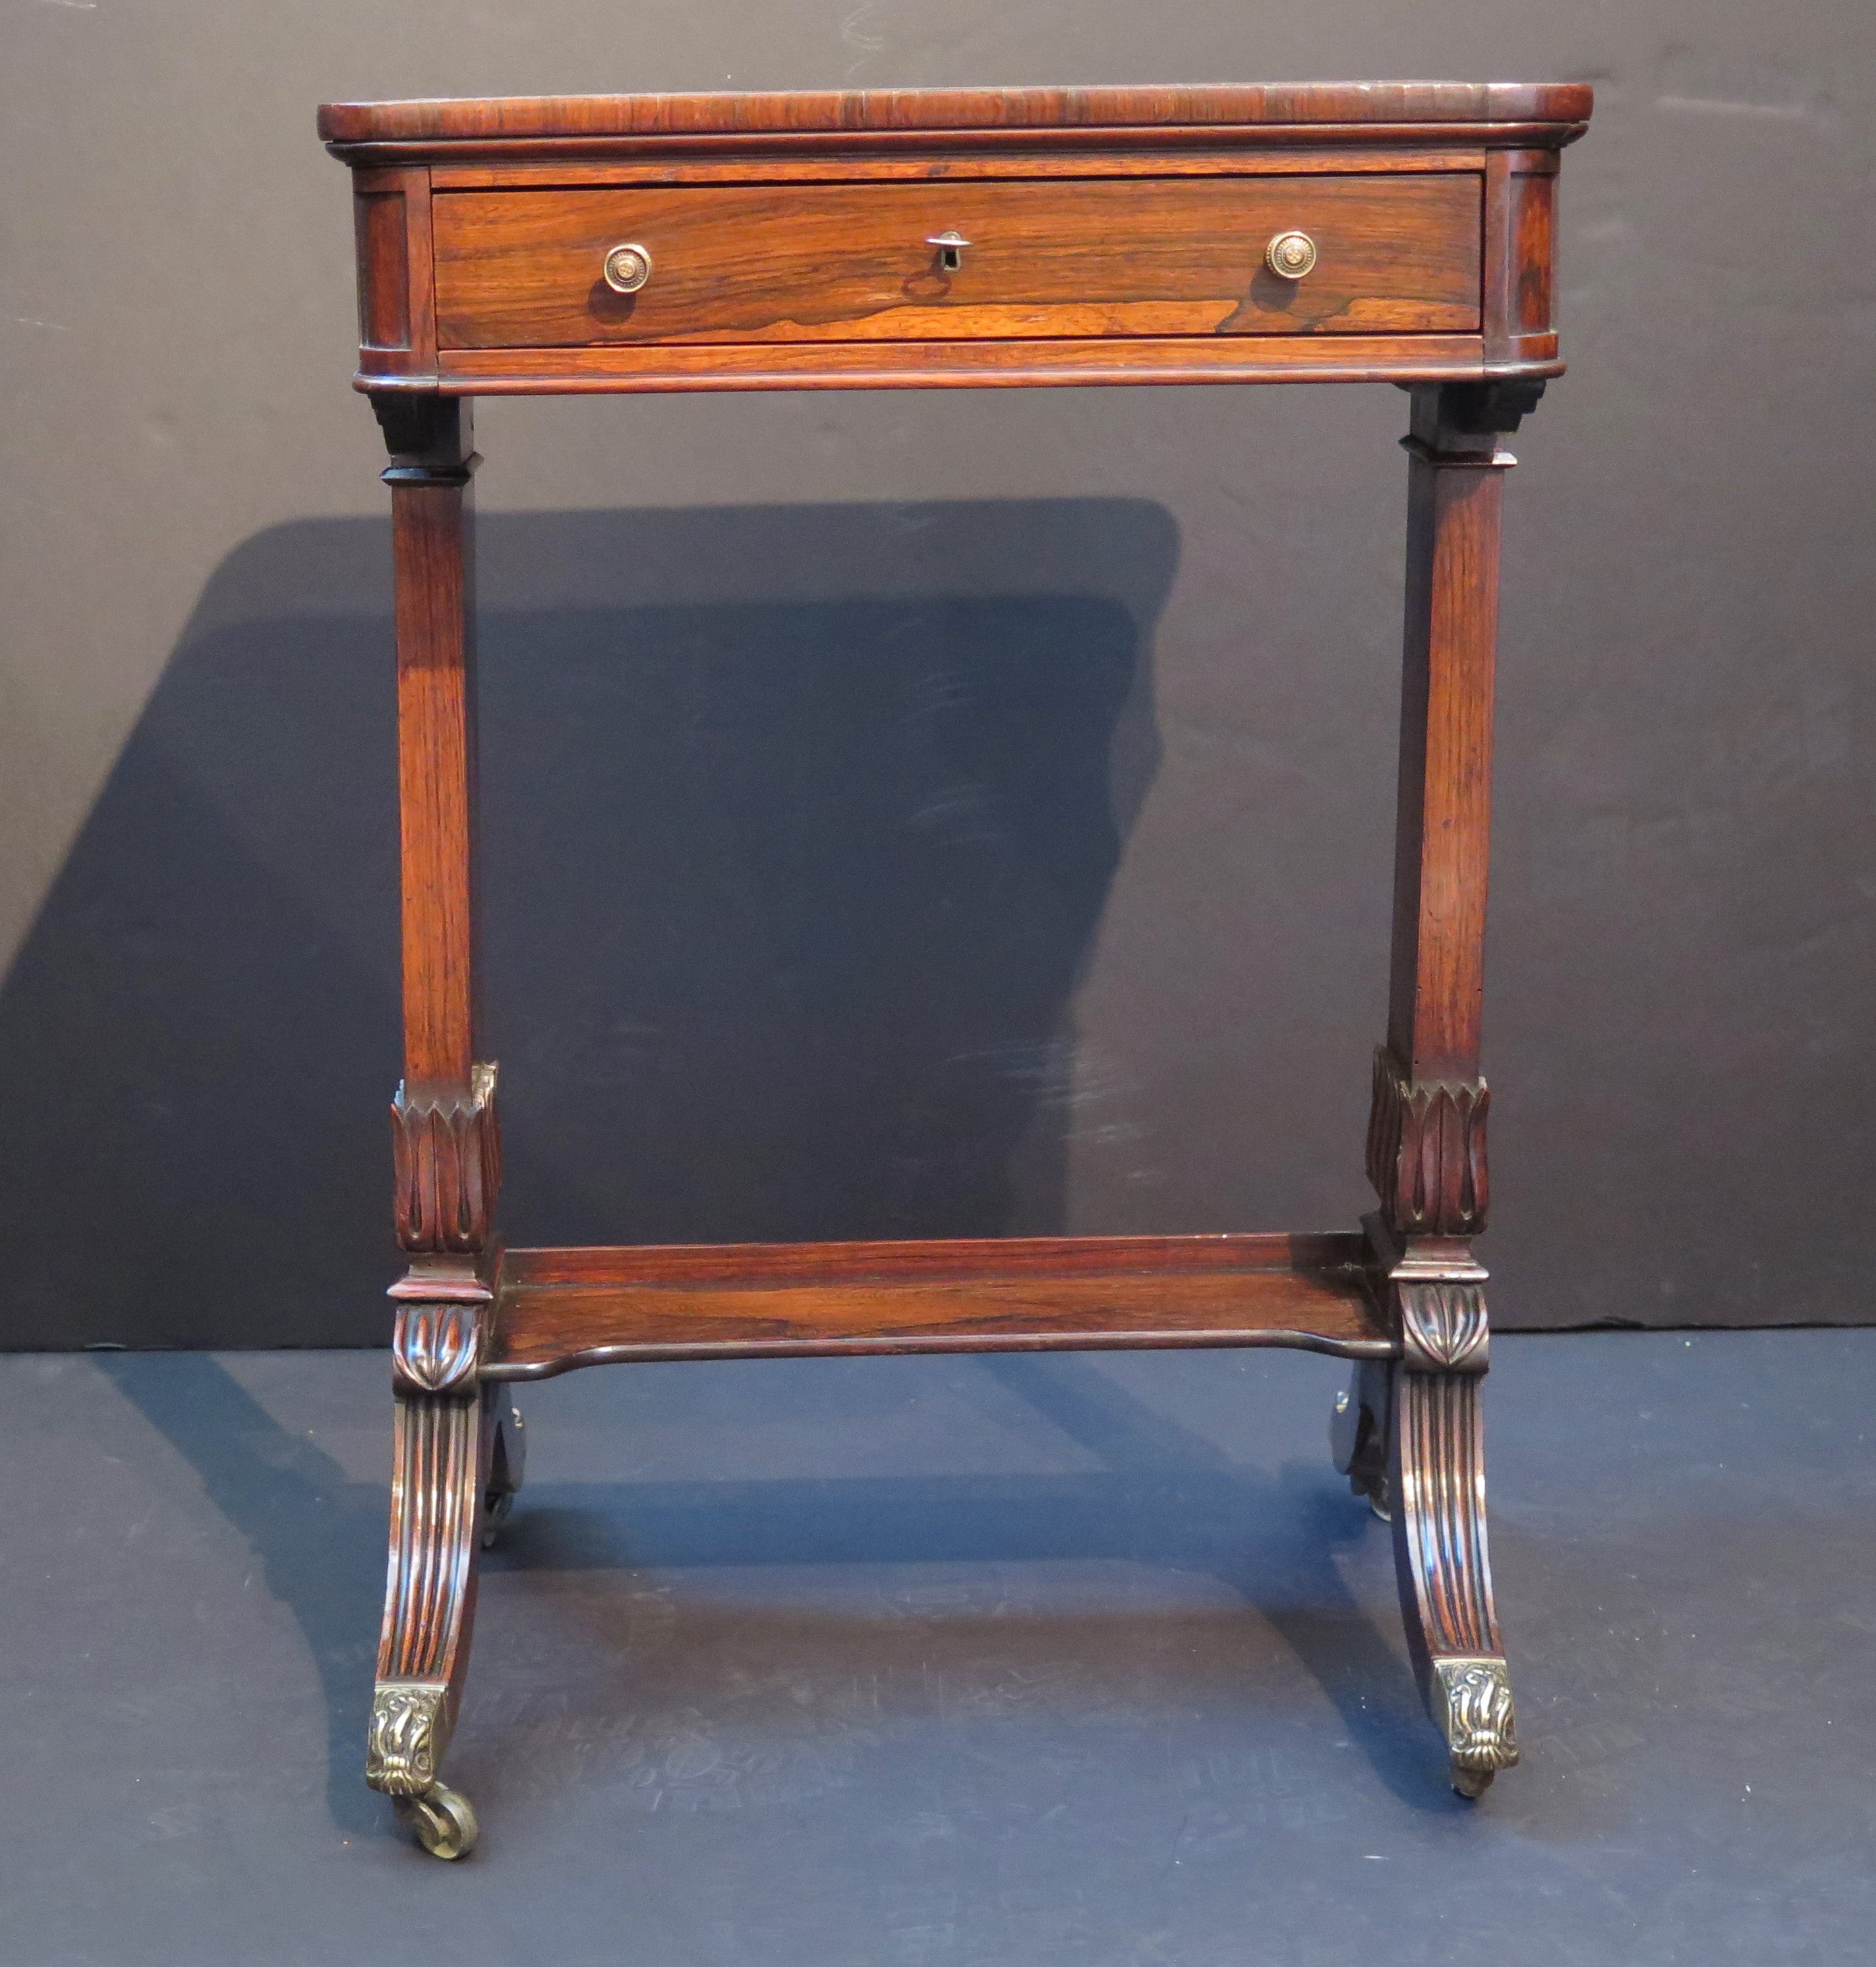 English Regency Lady's Work Table of Rosewood